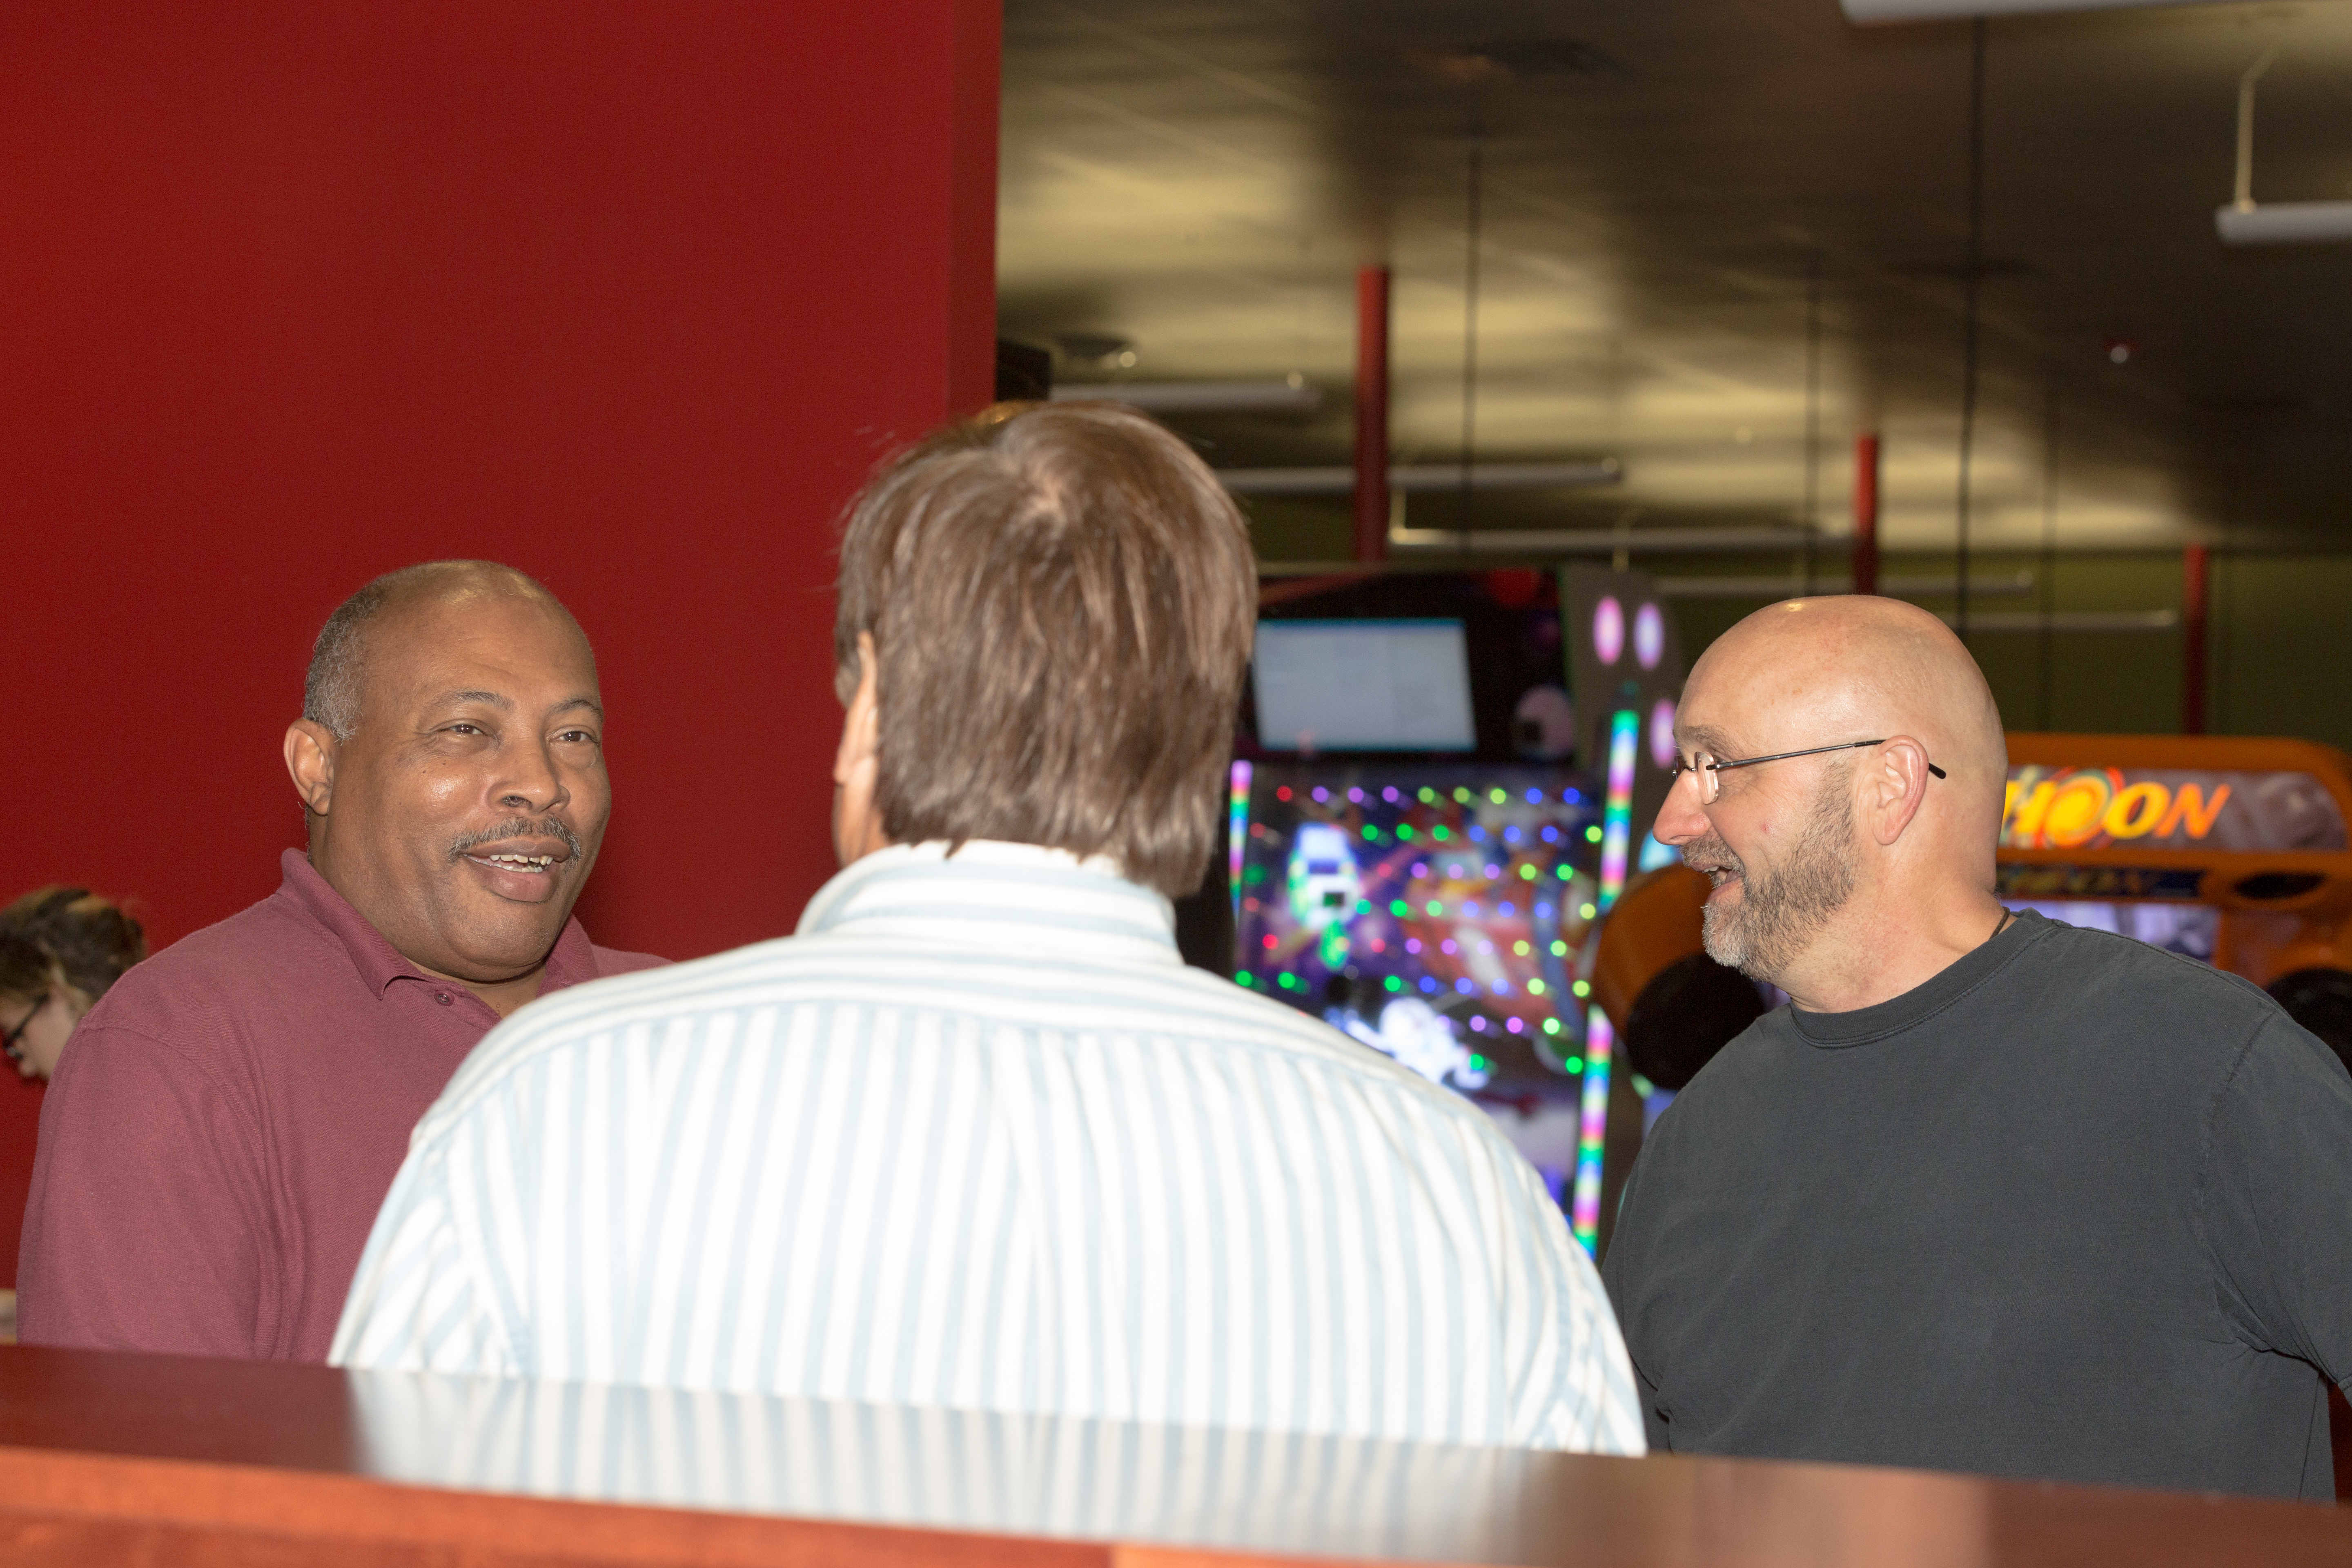 LaMont Johnson at Fund Raising Event, Bowling for The Battle with DJ's DeJay Jay and Robert White